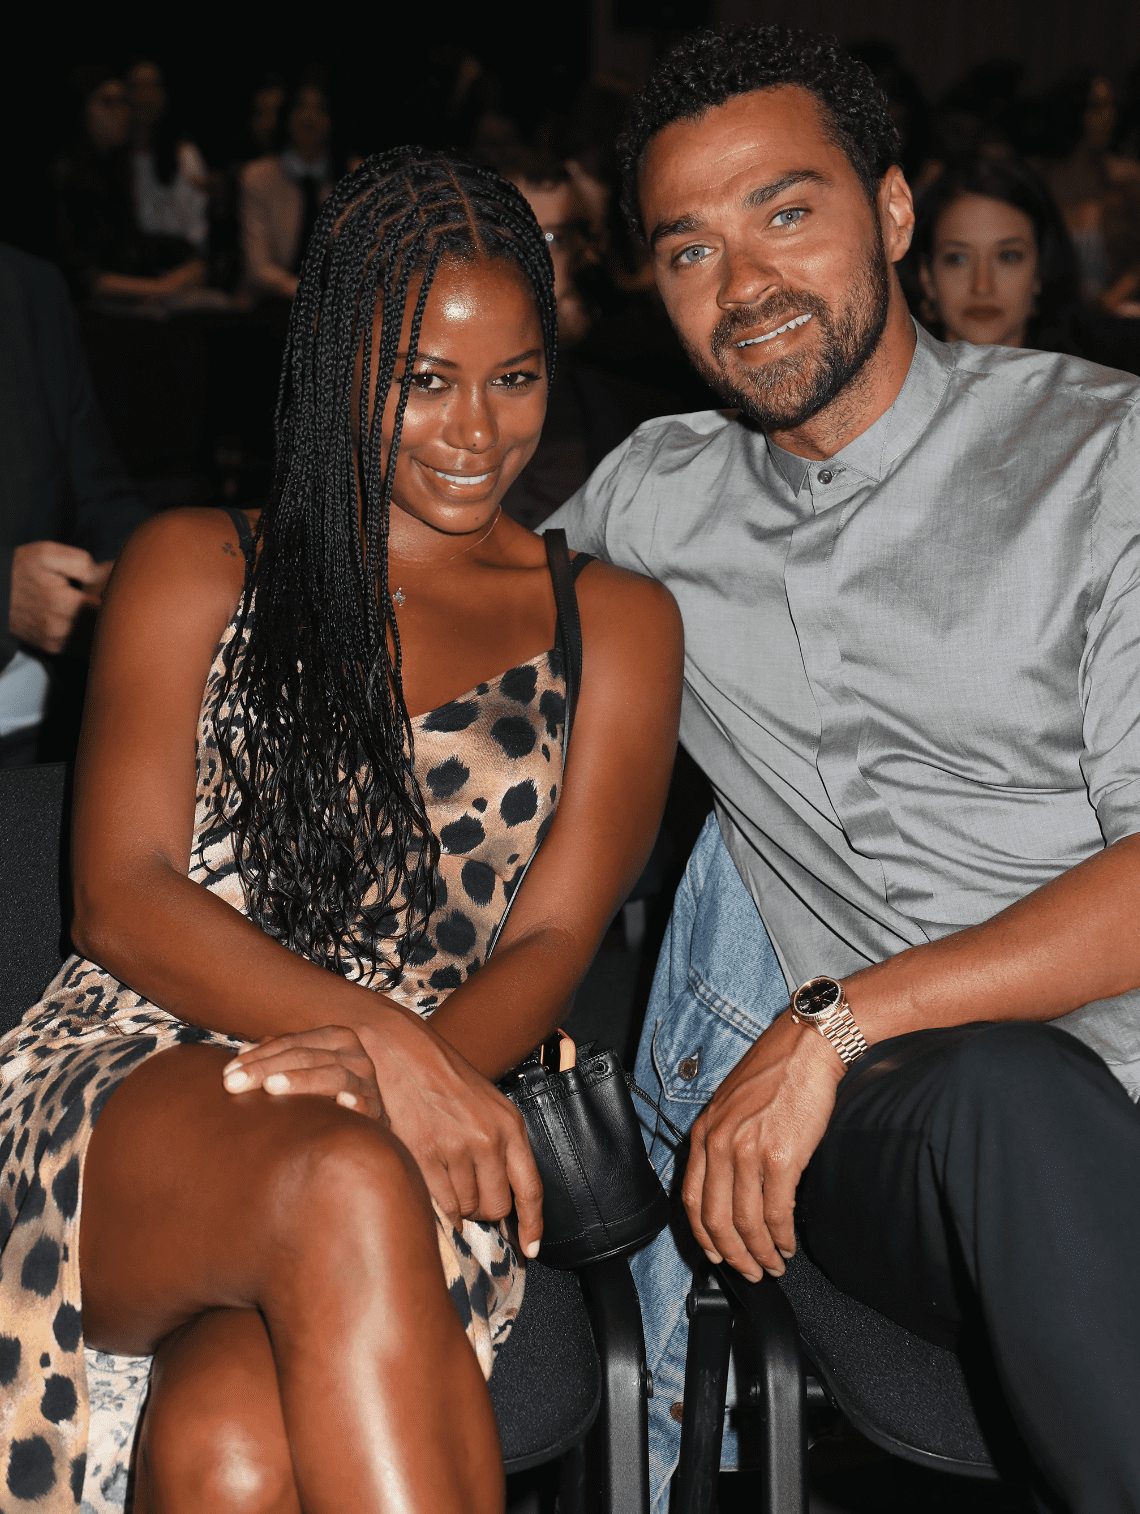 Grey S Anatomy Star Jesse William Gets A Touching Tribute From His Girlfriend Taylour Paige What For